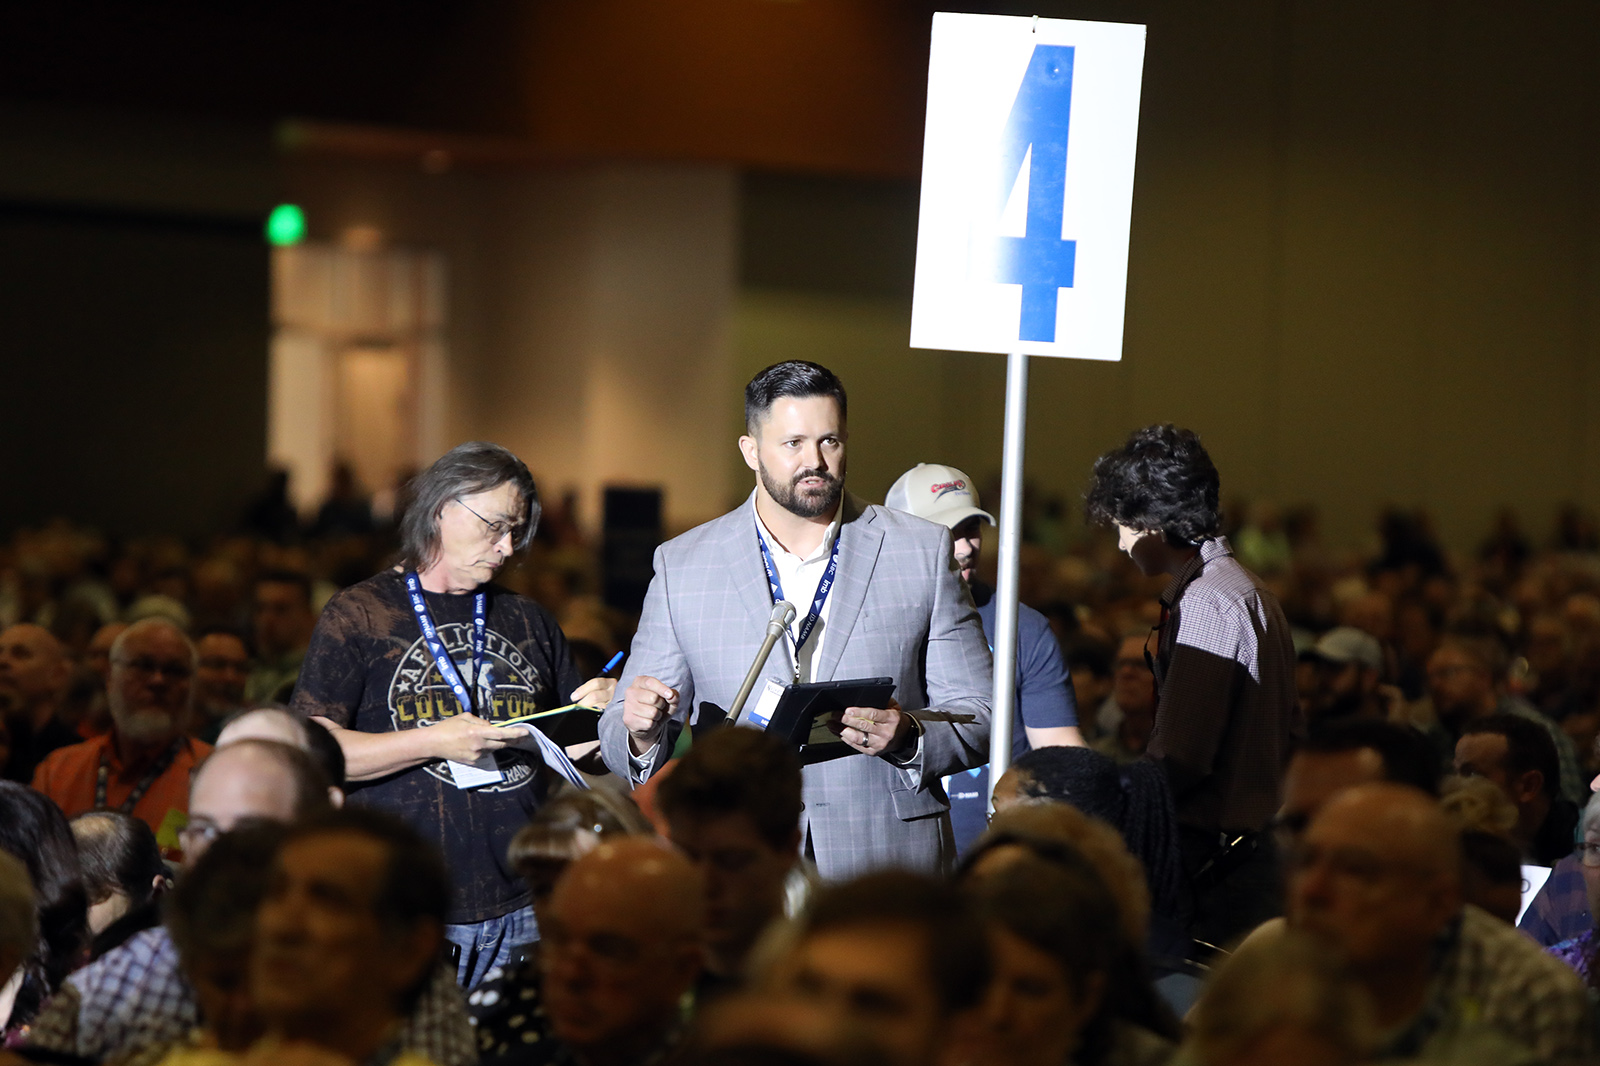 Tennessee pastor and messenger Grant Gaines talks about his proposed task force during the Southern Baptist Convention annual meeting, Wednesday, June 16, 2021, in Nashville. RNS photo by Kit Doyle